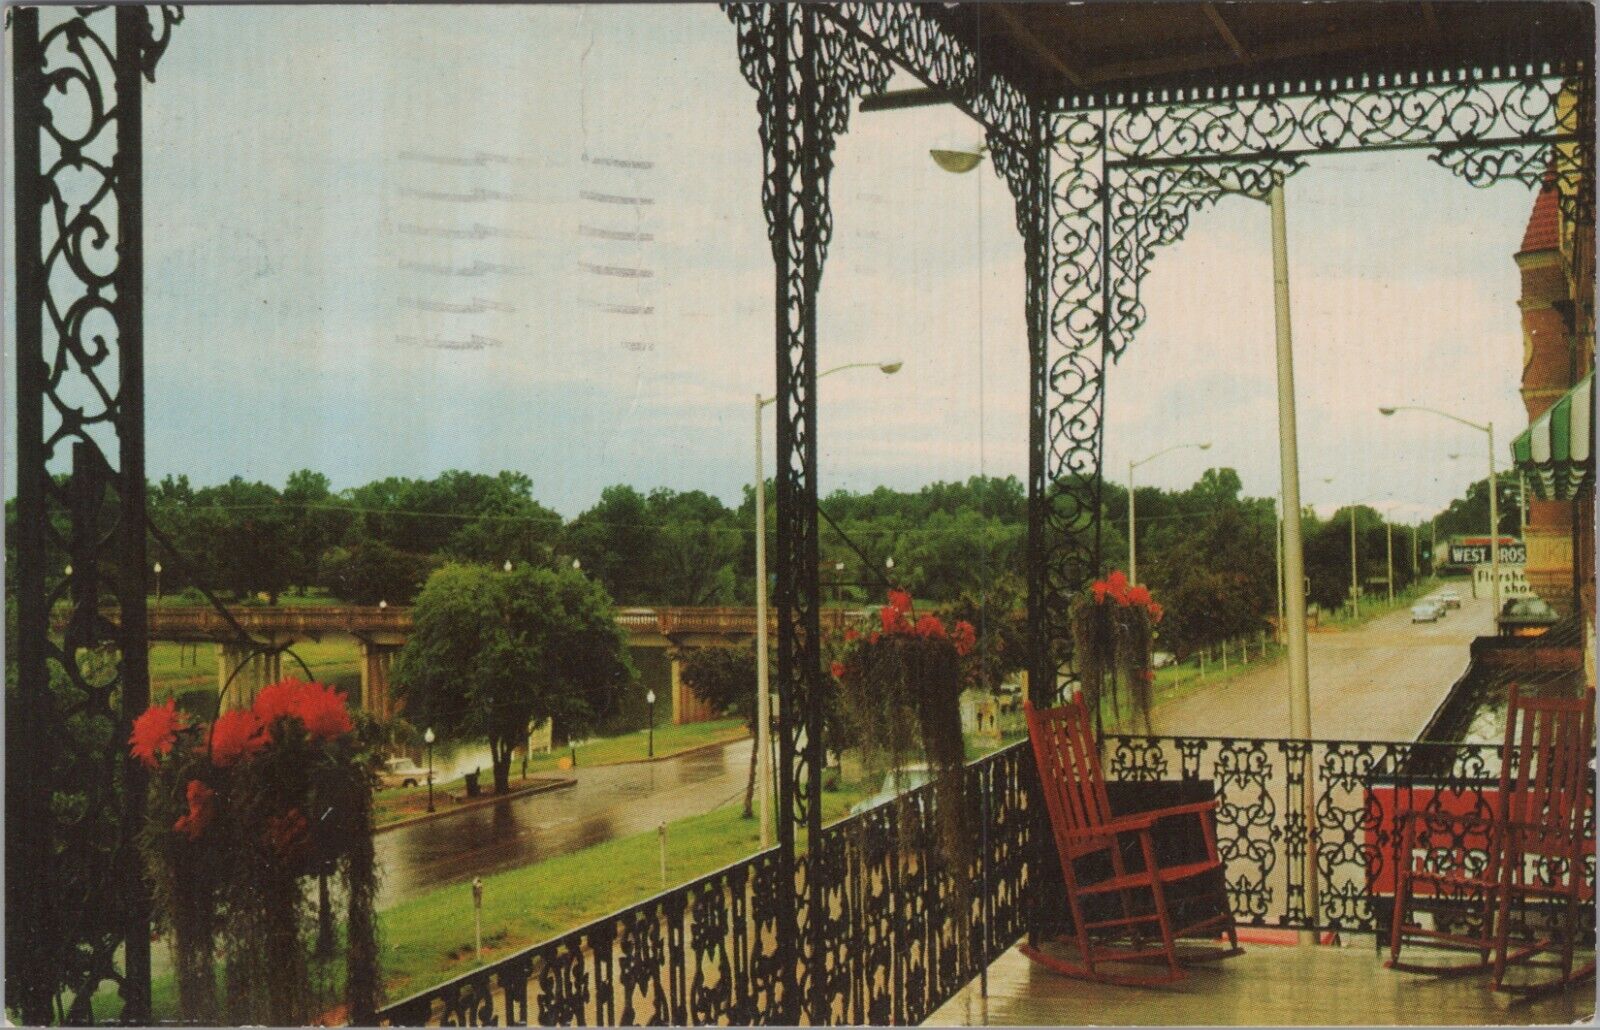 MR ALE c1960s Postcard Front Street Lace Work in Natchitoches, Louisiana 5899c4